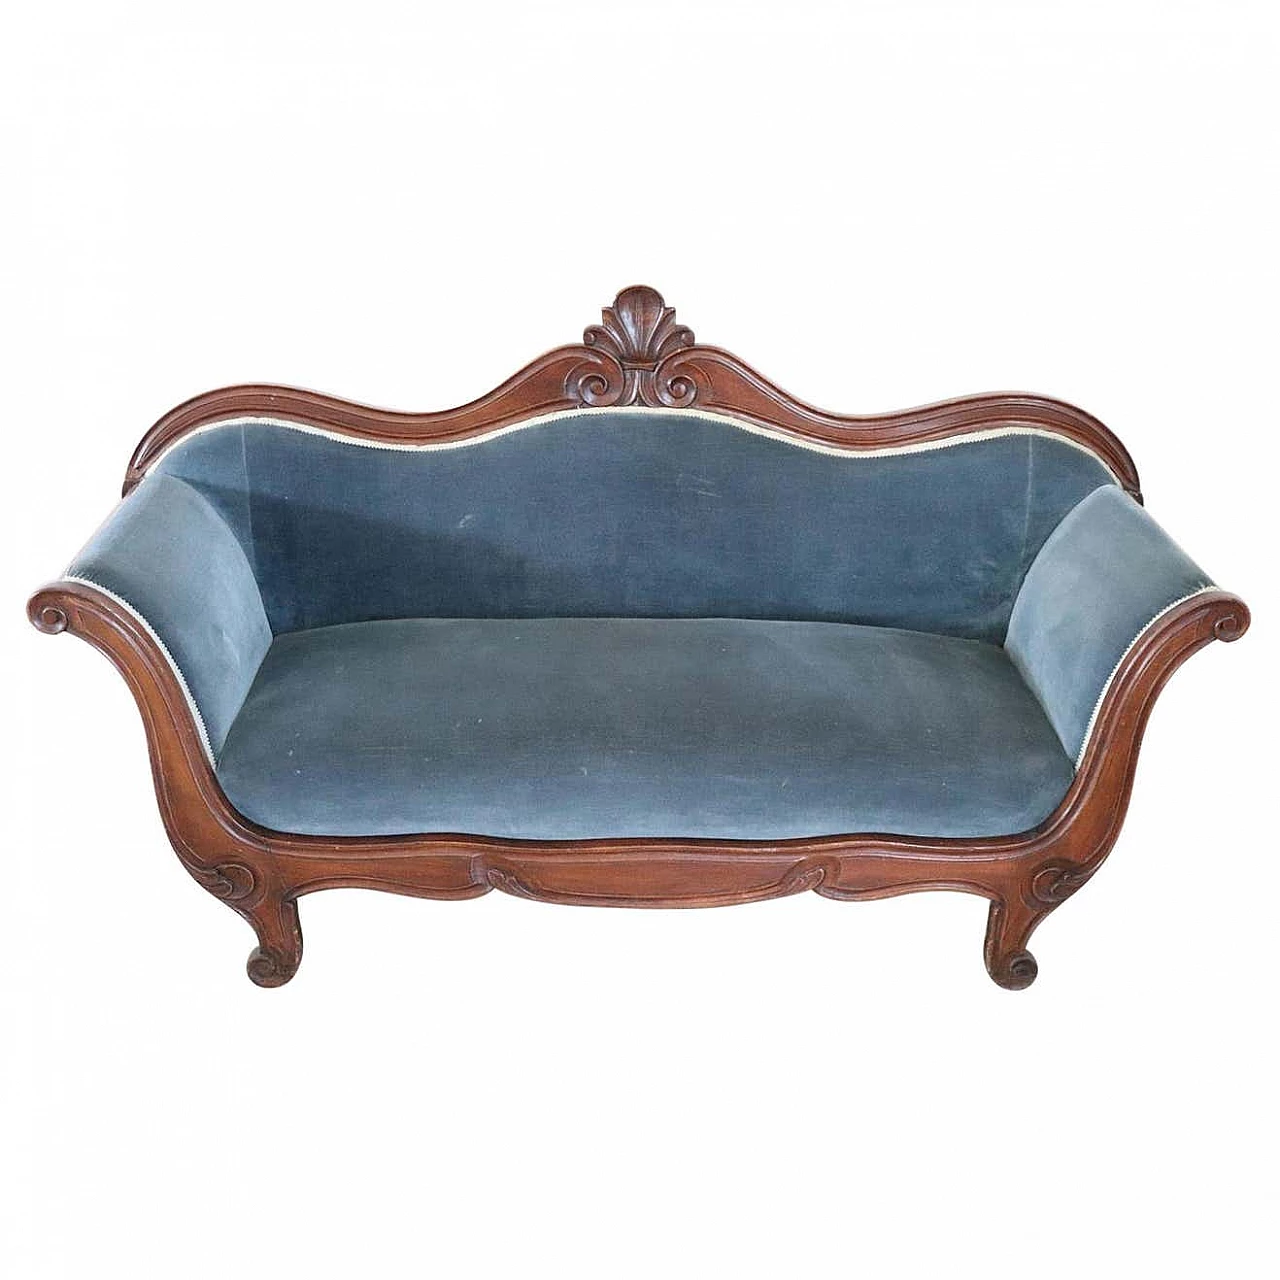 Louis Philippe sofa in beech wood and blue velvet, mid 19th century 1310980